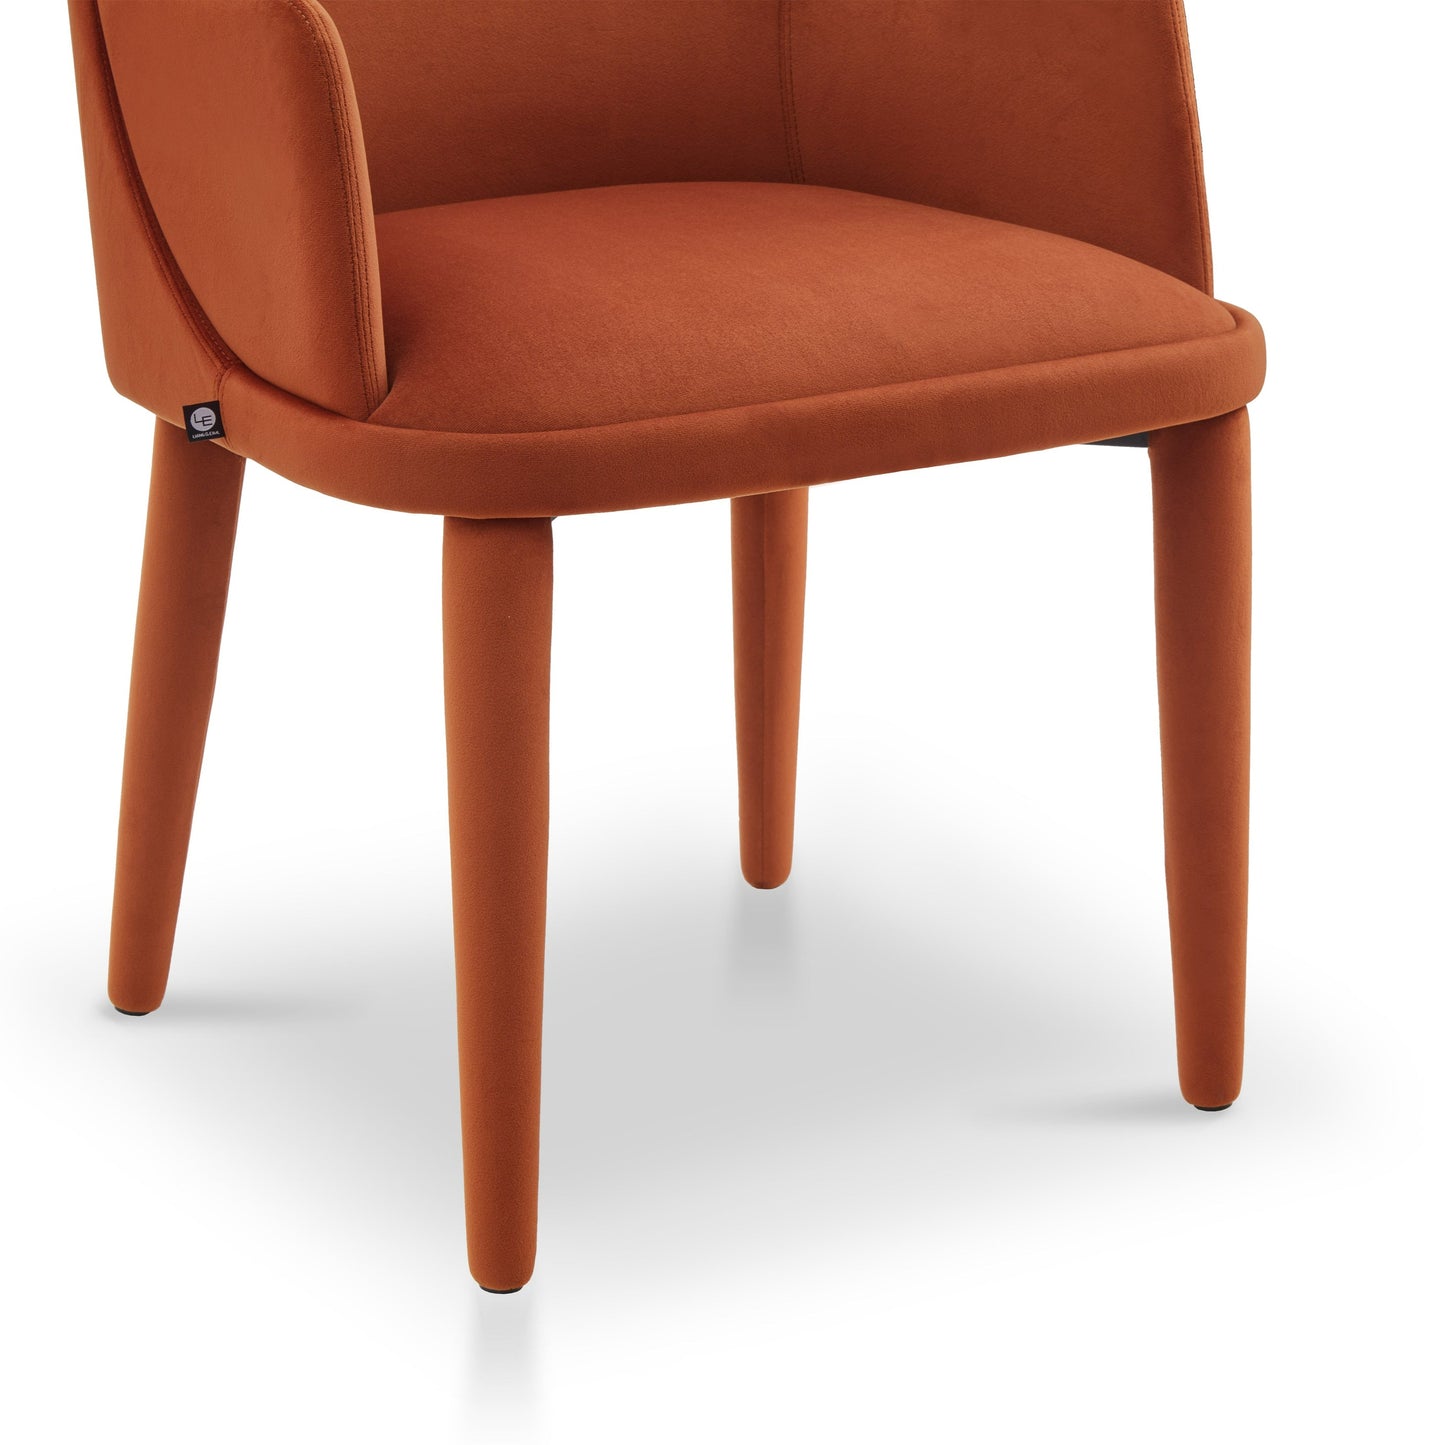 Liang & Eimil Diva Dining Chair with Arms in Kaster Crimson Red